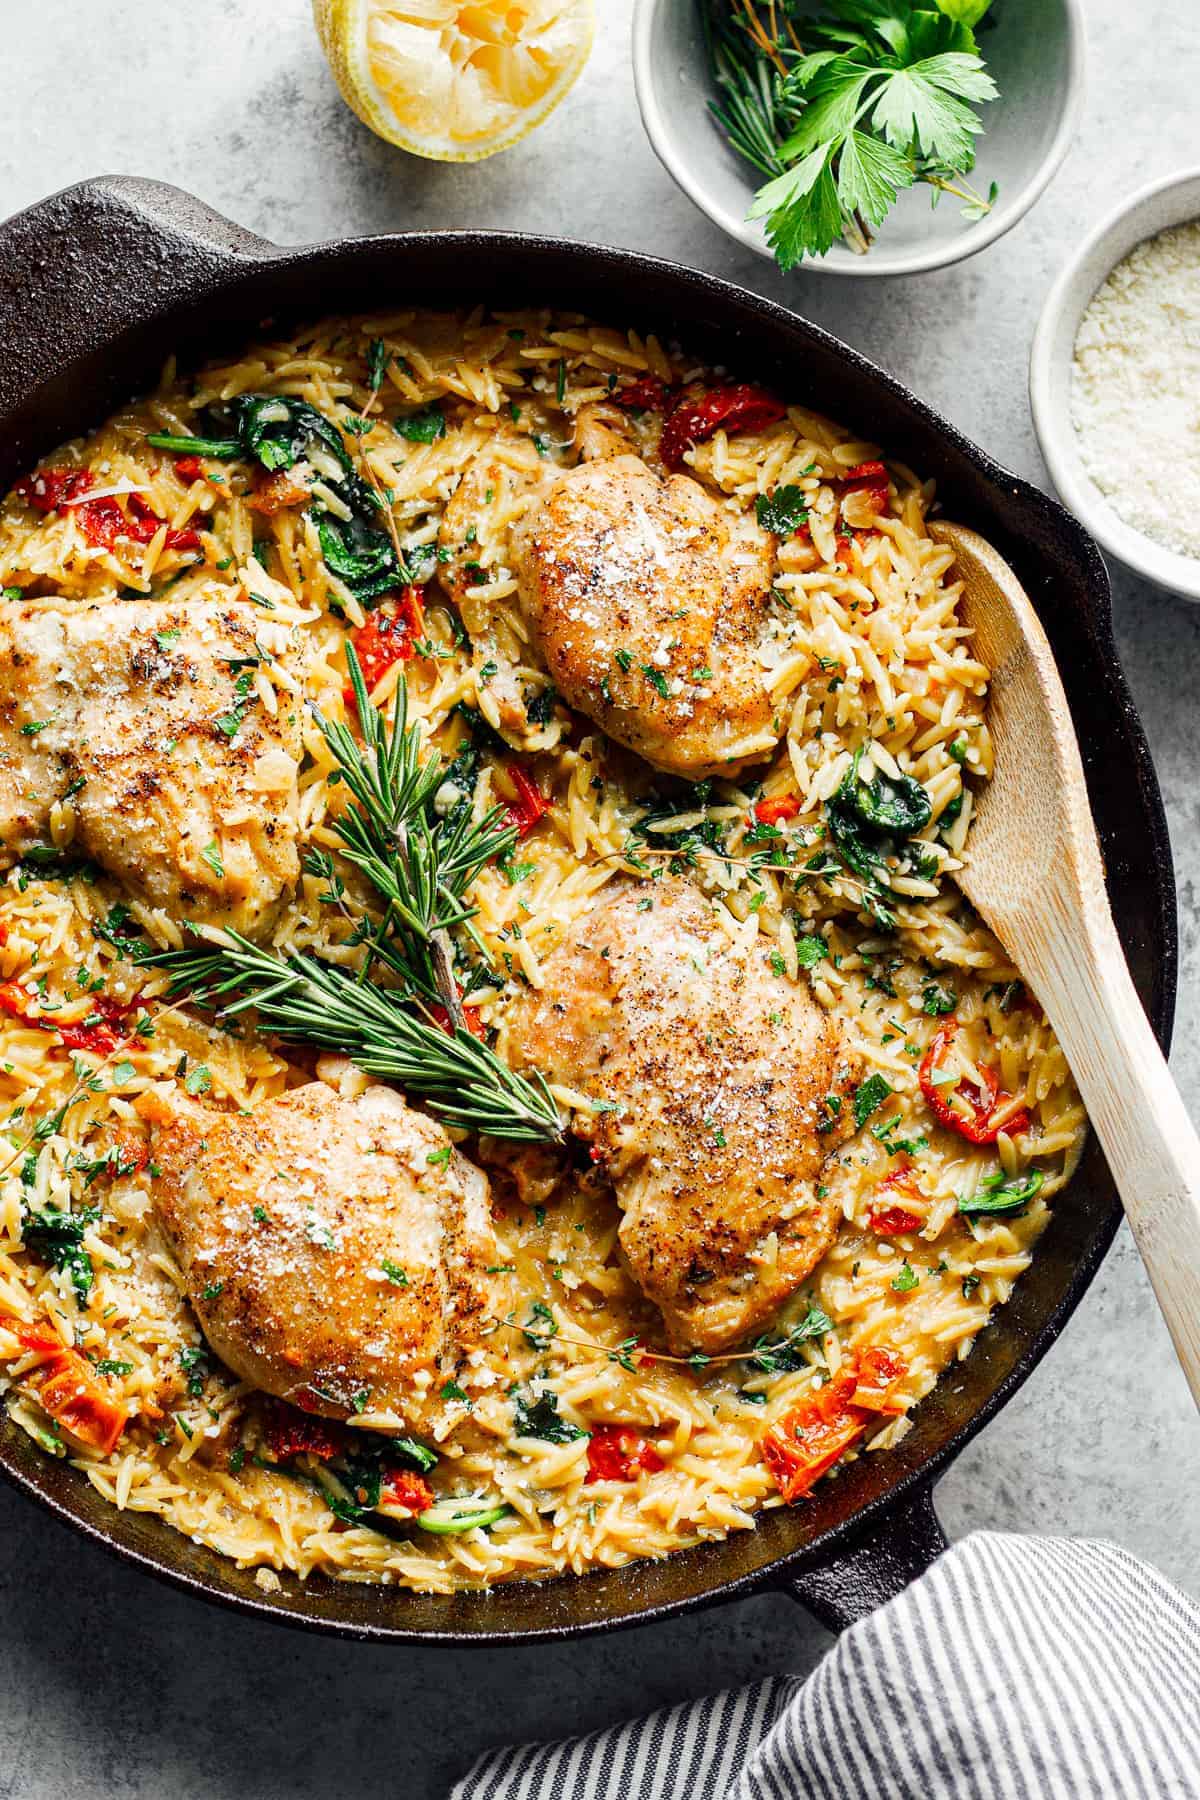 https://easychickenrecipes.com/wp-content/uploads/2020/11/tuscan-chicken-orzo-2-of-7.jpg